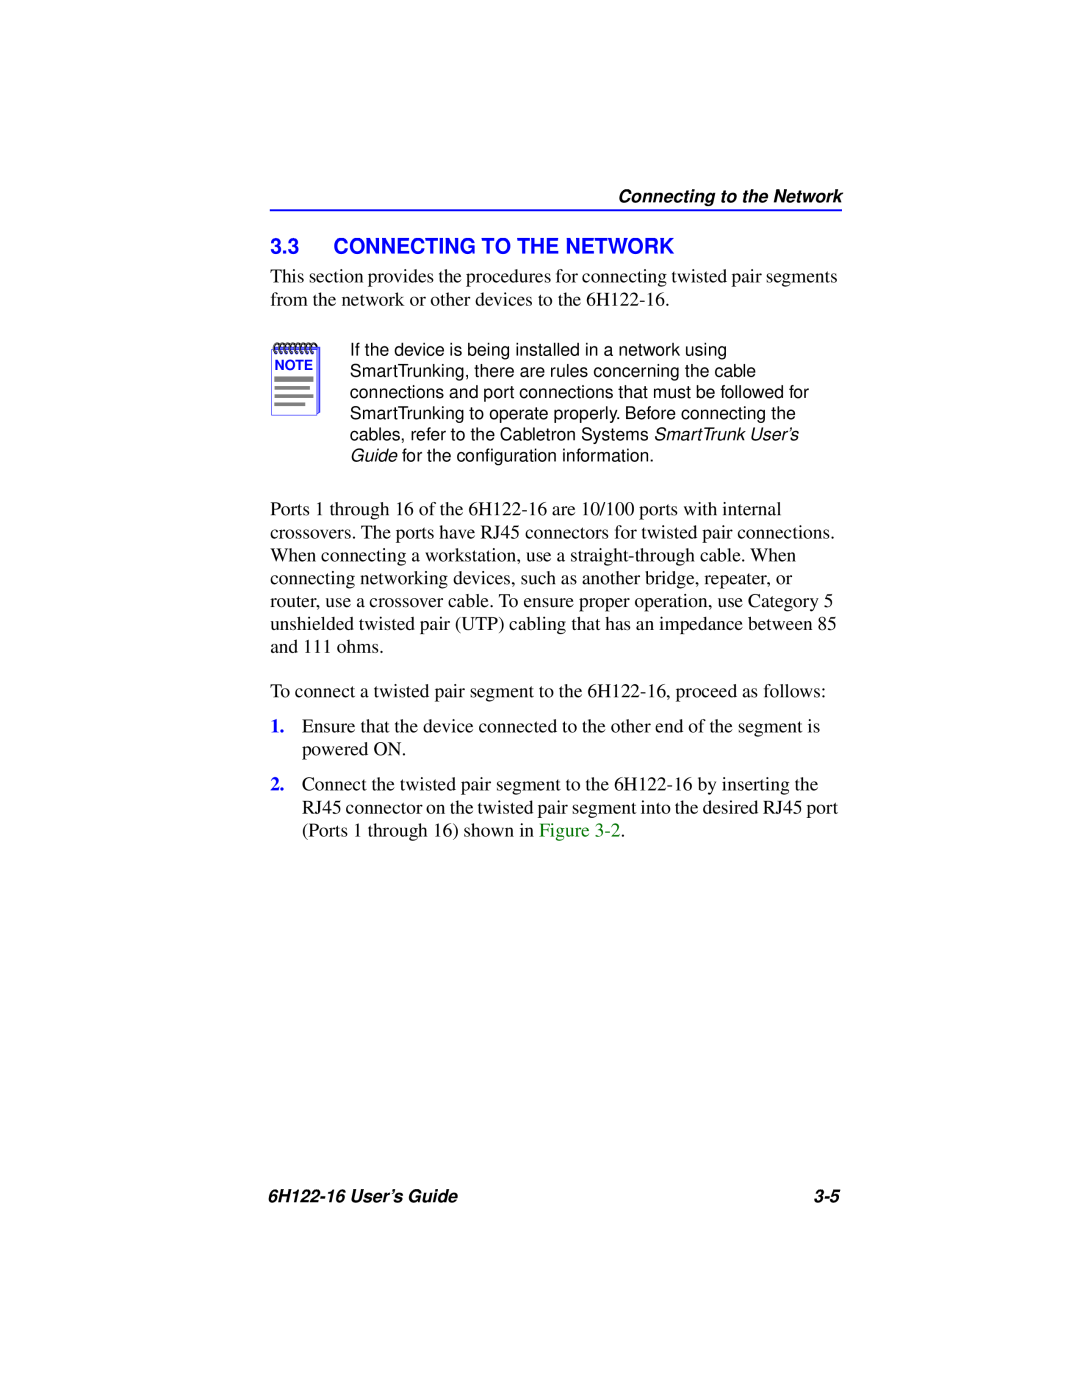 Cabletron Systems 6H122-16 manual Connecting To The Network 